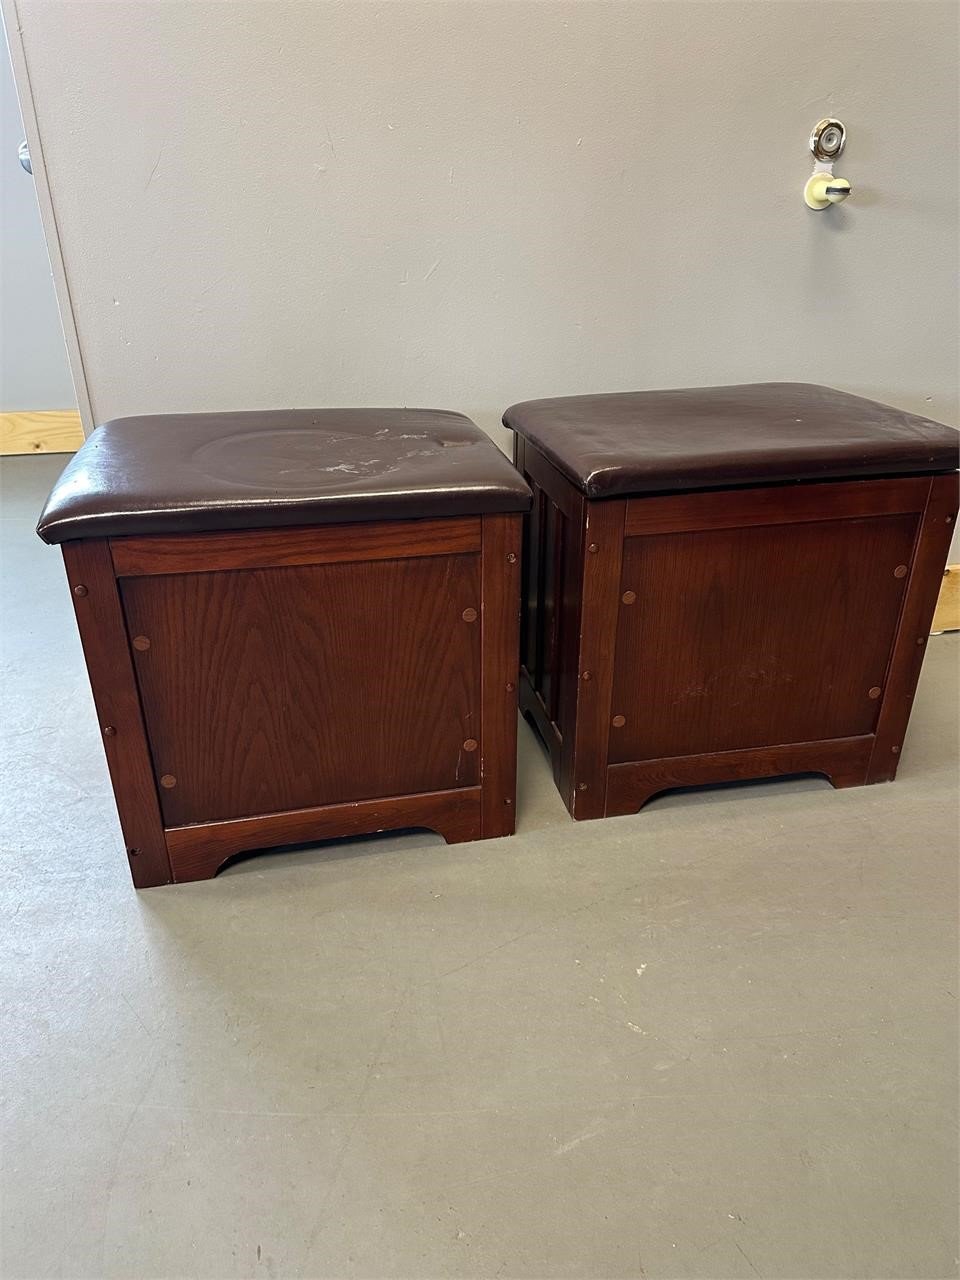 2 Padded Trunks Solid Wood 20"x 16"x 21" Tall